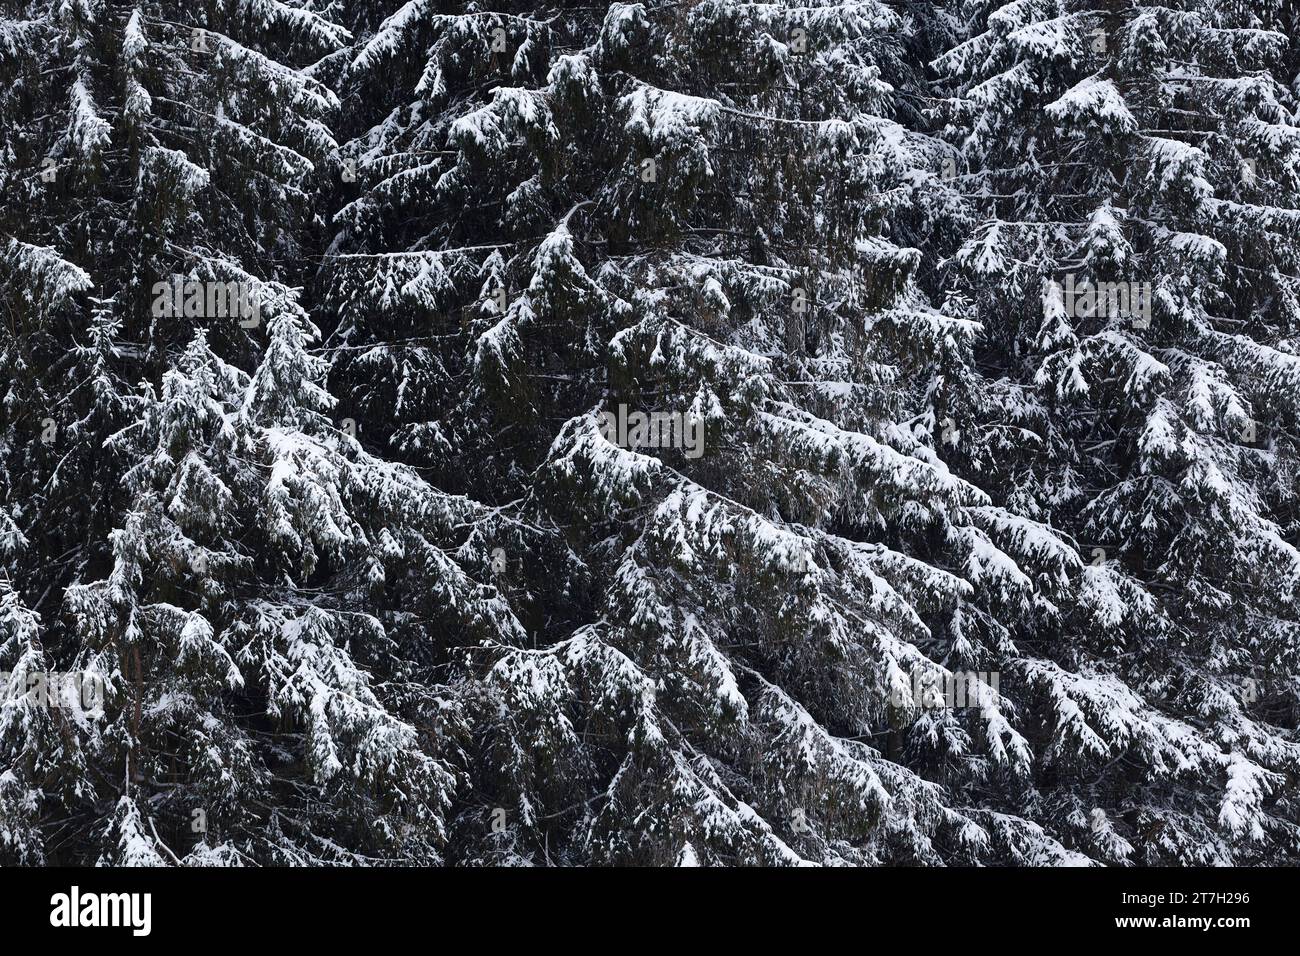 Snow-covered fir trees (Abies) in the Vosges Mountains near Le Bonhomme, Haut-Rhin, Grand Est, France Stock Photo